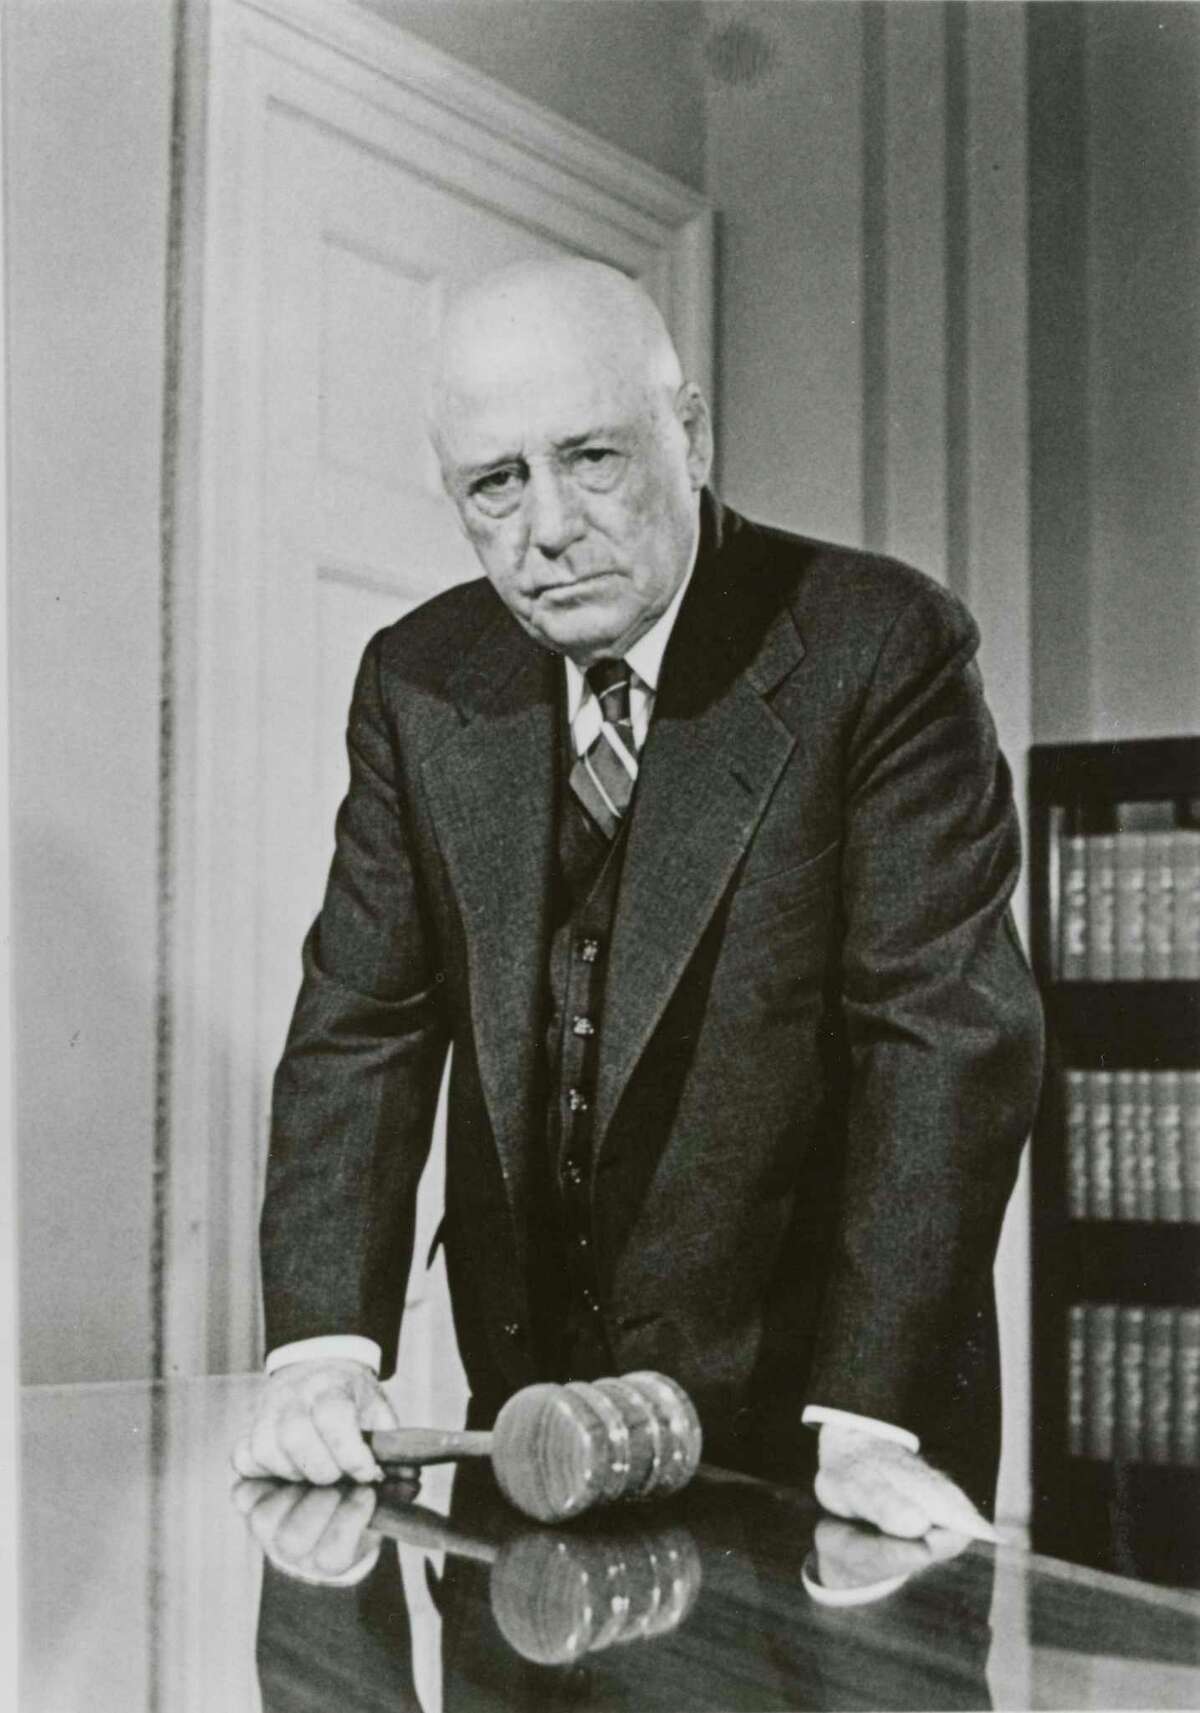 Sam Rayburn served in the U.S. House of Representatives for 48 years and as Speaker three times.